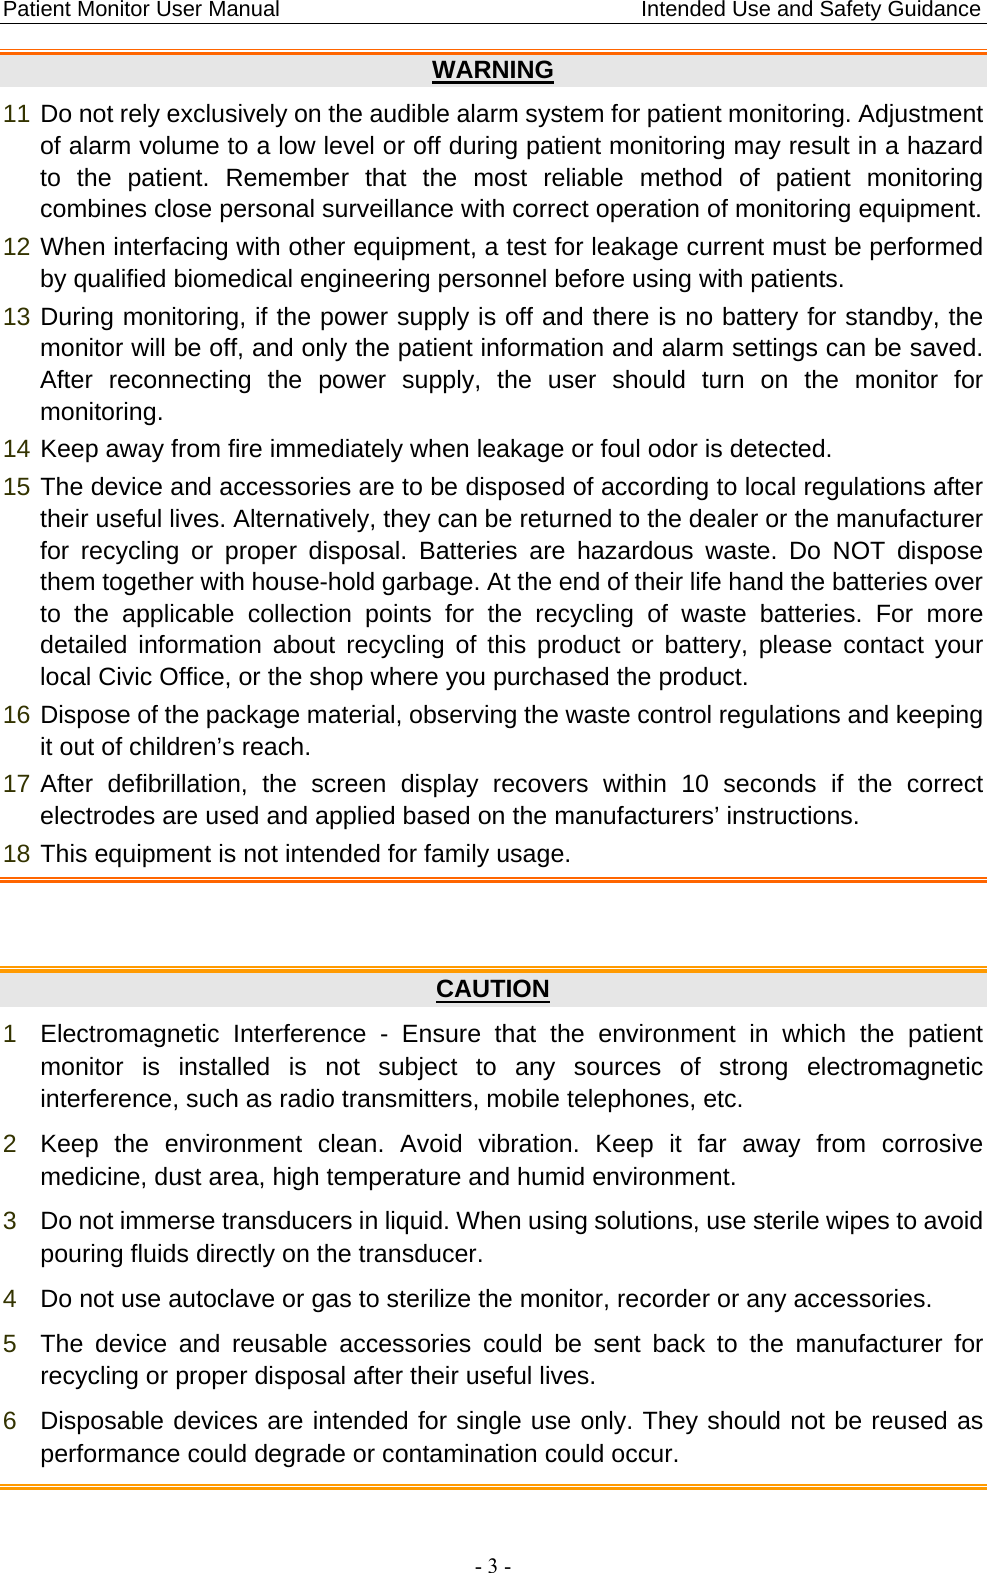 Patient Monitor User Manual                                 Intended Use and Safety Guidance  - 3 - WARNING 11 Do not rely exclusively on the audible alarm system for patient monitoring. Adjustment of alarm volume to a low level or off during patient monitoring may result in a hazard to the patient. Remember that the most reliable method of patient monitoring combines close personal surveillance with correct operation of monitoring equipment. 12 When interfacing with other equipment, a test for leakage current must be performed by qualified biomedical engineering personnel before using with patients. 13 During monitoring, if the power supply is off and there is no battery for standby, the monitor will be off, and only the patient information and alarm settings can be saved. After reconnecting the power supply, the user should turn on the monitor for monitoring. 14 Keep away from fire immediately when leakage or foul odor is detected. 15 The device and accessories are to be disposed of according to local regulations after their useful lives. Alternatively, they can be returned to the dealer or the manufacturer for recycling or proper disposal. Batteries are hazardous waste. Do NOT dispose them together with house-hold garbage. At the end of their life hand the batteries over to the applicable collection points for the recycling of waste batteries. For more detailed information about recycling of this product or battery, please contact your local Civic Office, or the shop where you purchased the product. 16 Dispose of the package material, observing the waste control regulations and keeping it out of children’s reach. 17 After defibrillation, the screen display recovers within 10 seconds if the correct electrodes are used and applied based on the manufacturers’ instructions. 18 This equipment is not intended for family usage.   CAUTION 1  Electromagnetic Interference - Ensure that the environment in which the patient monitor is installed is not subject to any sources of strong electromagnetic interference, such as radio transmitters, mobile telephones, etc. 2  Keep the environment clean. Avoid vibration. Keep it far away from corrosive medicine, dust area, high temperature and humid environment. 3  Do not immerse transducers in liquid. When using solutions, use sterile wipes to avoid pouring fluids directly on the transducer. 4  Do not use autoclave or gas to sterilize the monitor, recorder or any accessories. 5  The device and reusable accessories could be sent back to the manufacturer for recycling or proper disposal after their useful lives. 6  Disposable devices are intended for single use only. They should not be reused as performance could degrade or contamination could occur.  